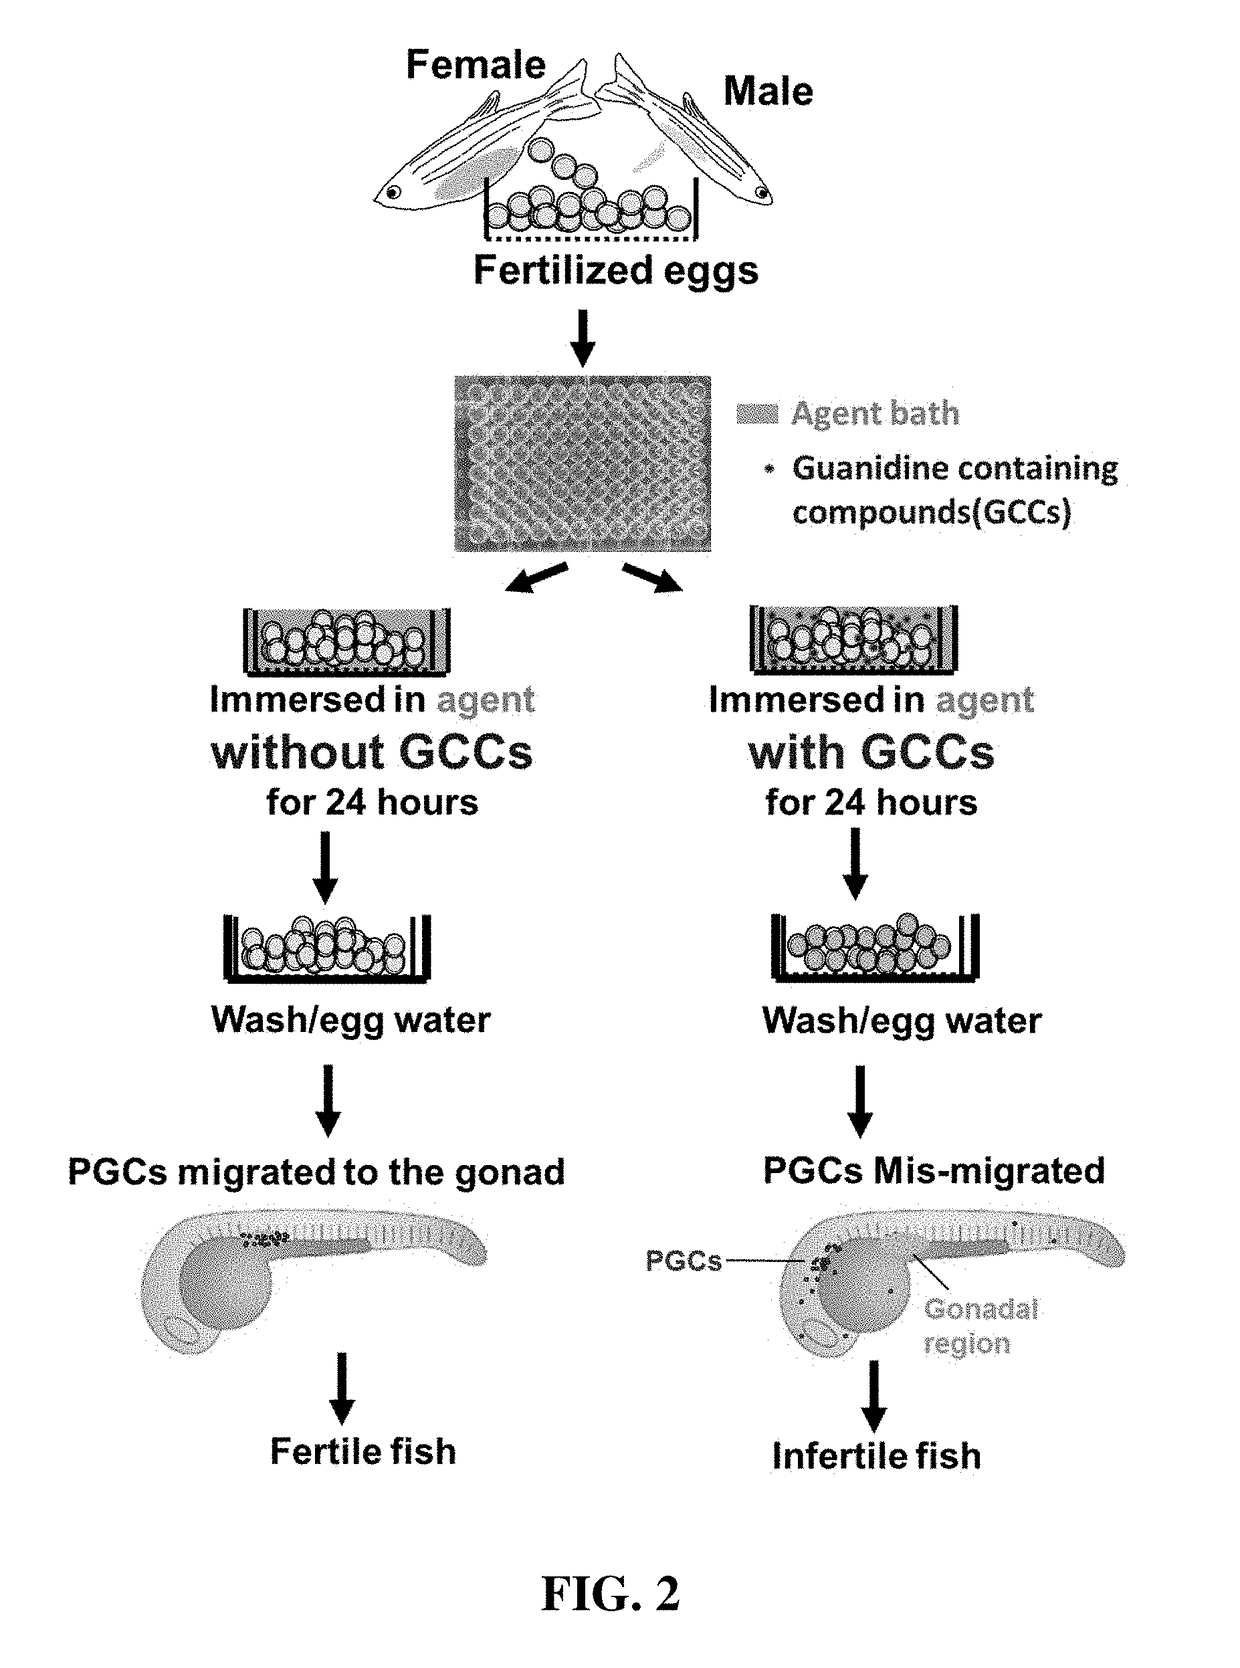 Methods of agent delivery into eggs and embryos of egg-producing aquatic animals for drug screening, agent toxicity assay and production of infertile fish